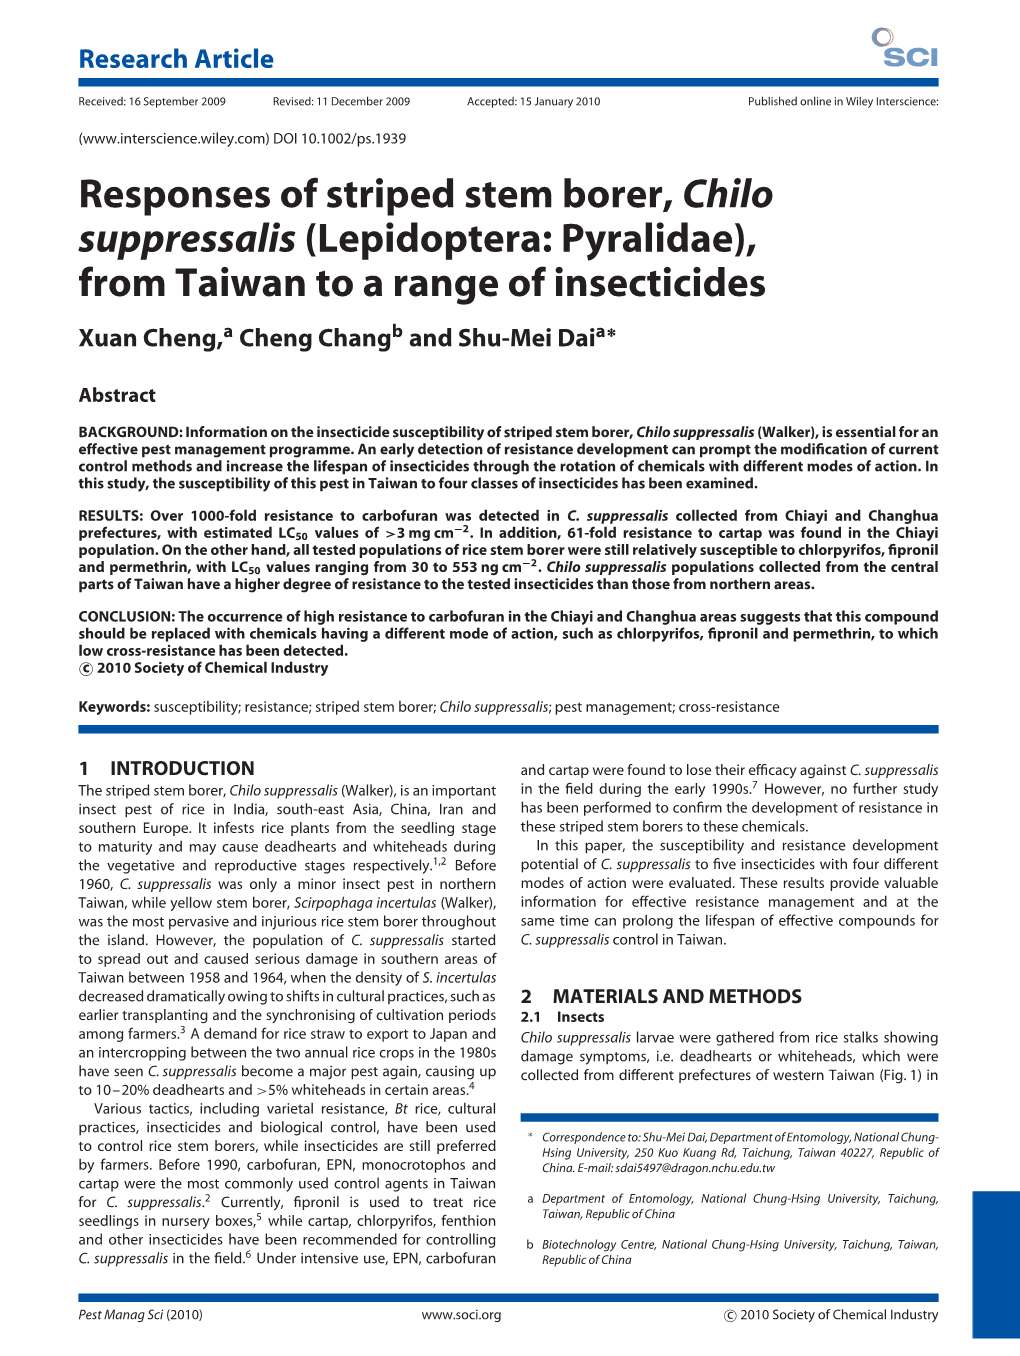 Responses of Striped Stem Borer, Chilo Suppressalis (Lepidoptera: Pyralidae), from Taiwan to a Range of Insecticides Xuan Cheng,A Cheng Changb and Shu-Mei Daia∗